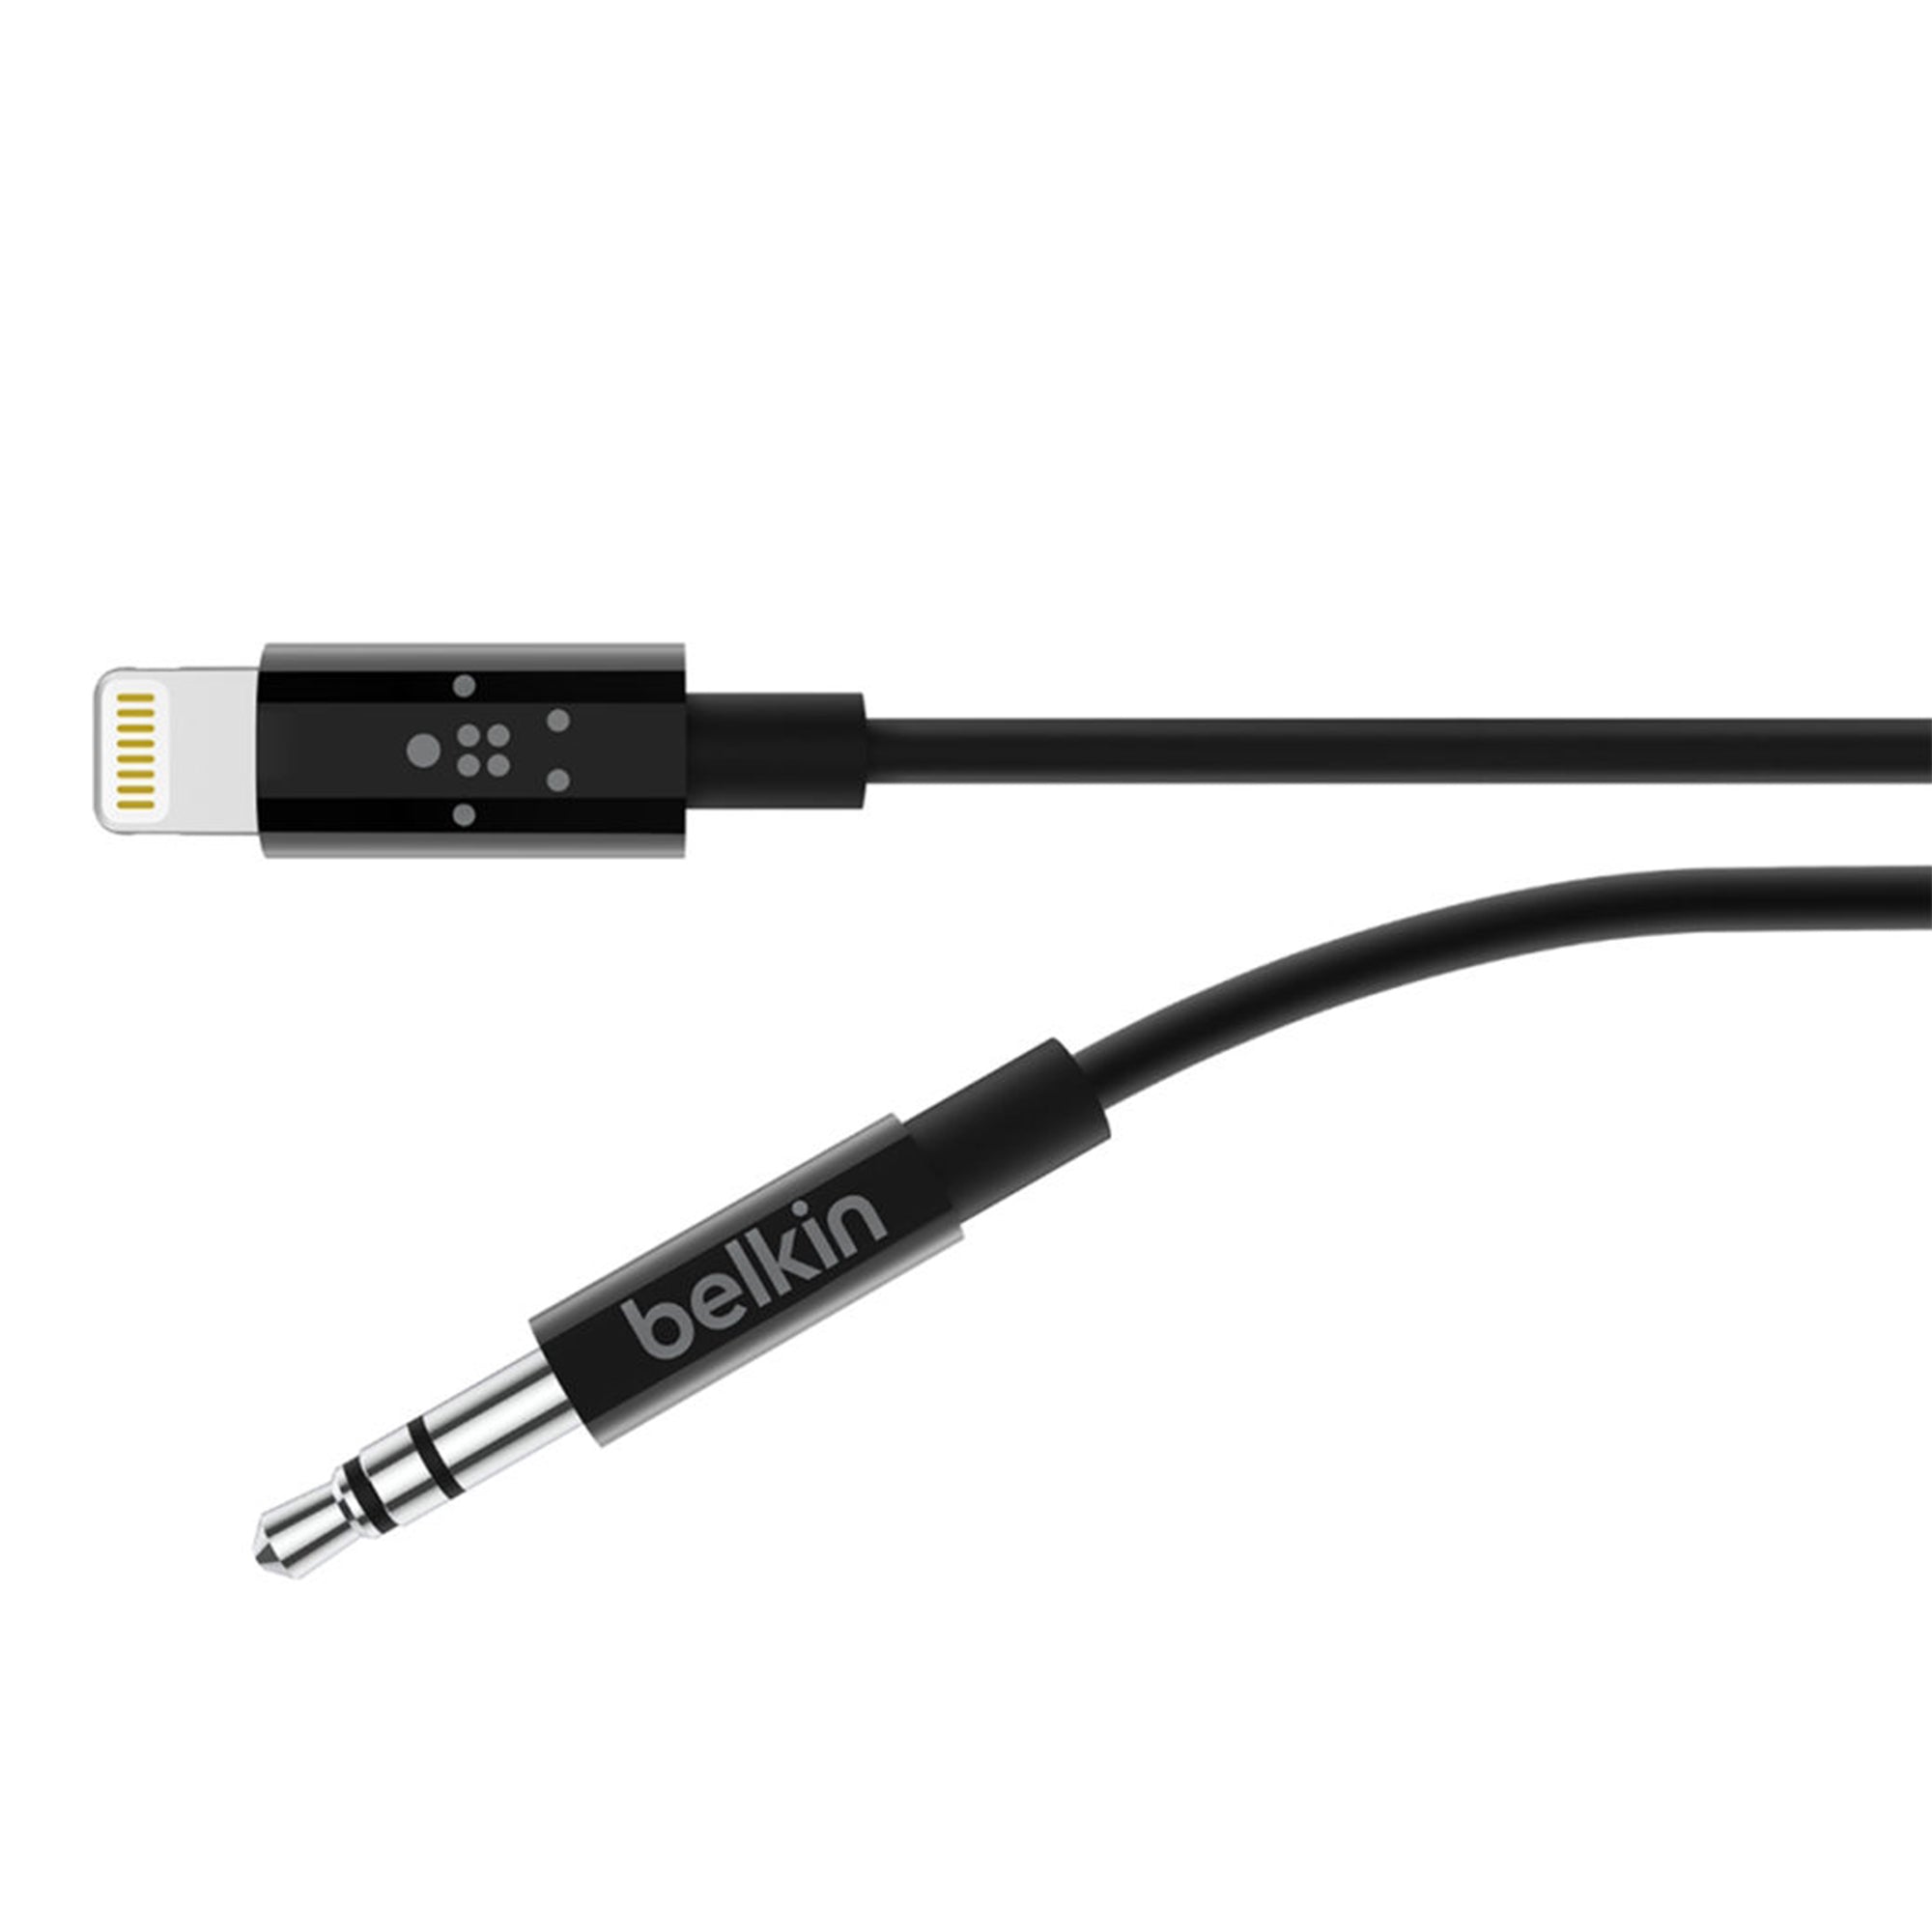 Belkin 3.5 mm Audio Cable With Lightning Connector